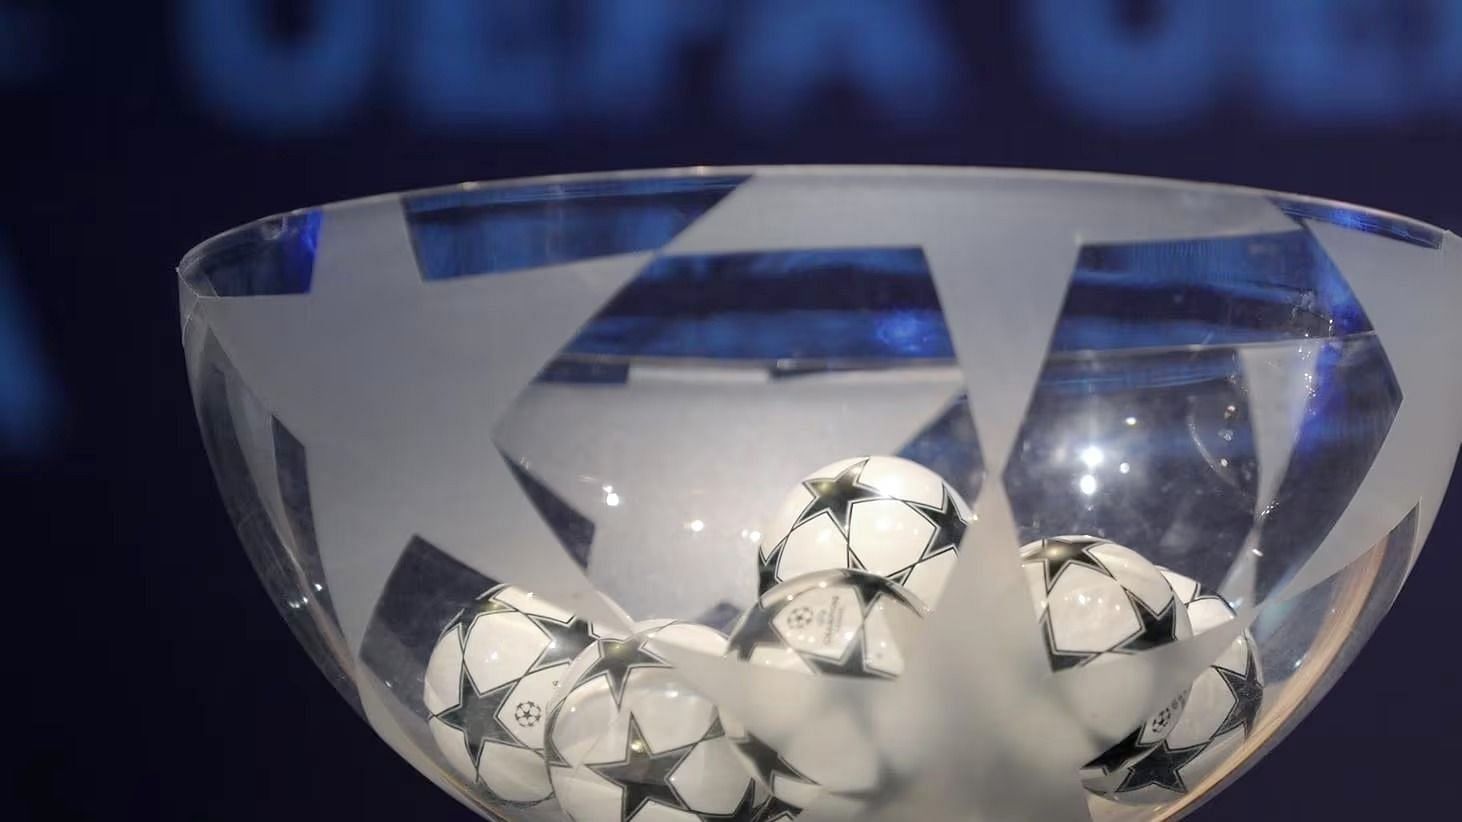 The UEFA Champions League quarter-final draw will be held in Switzerland